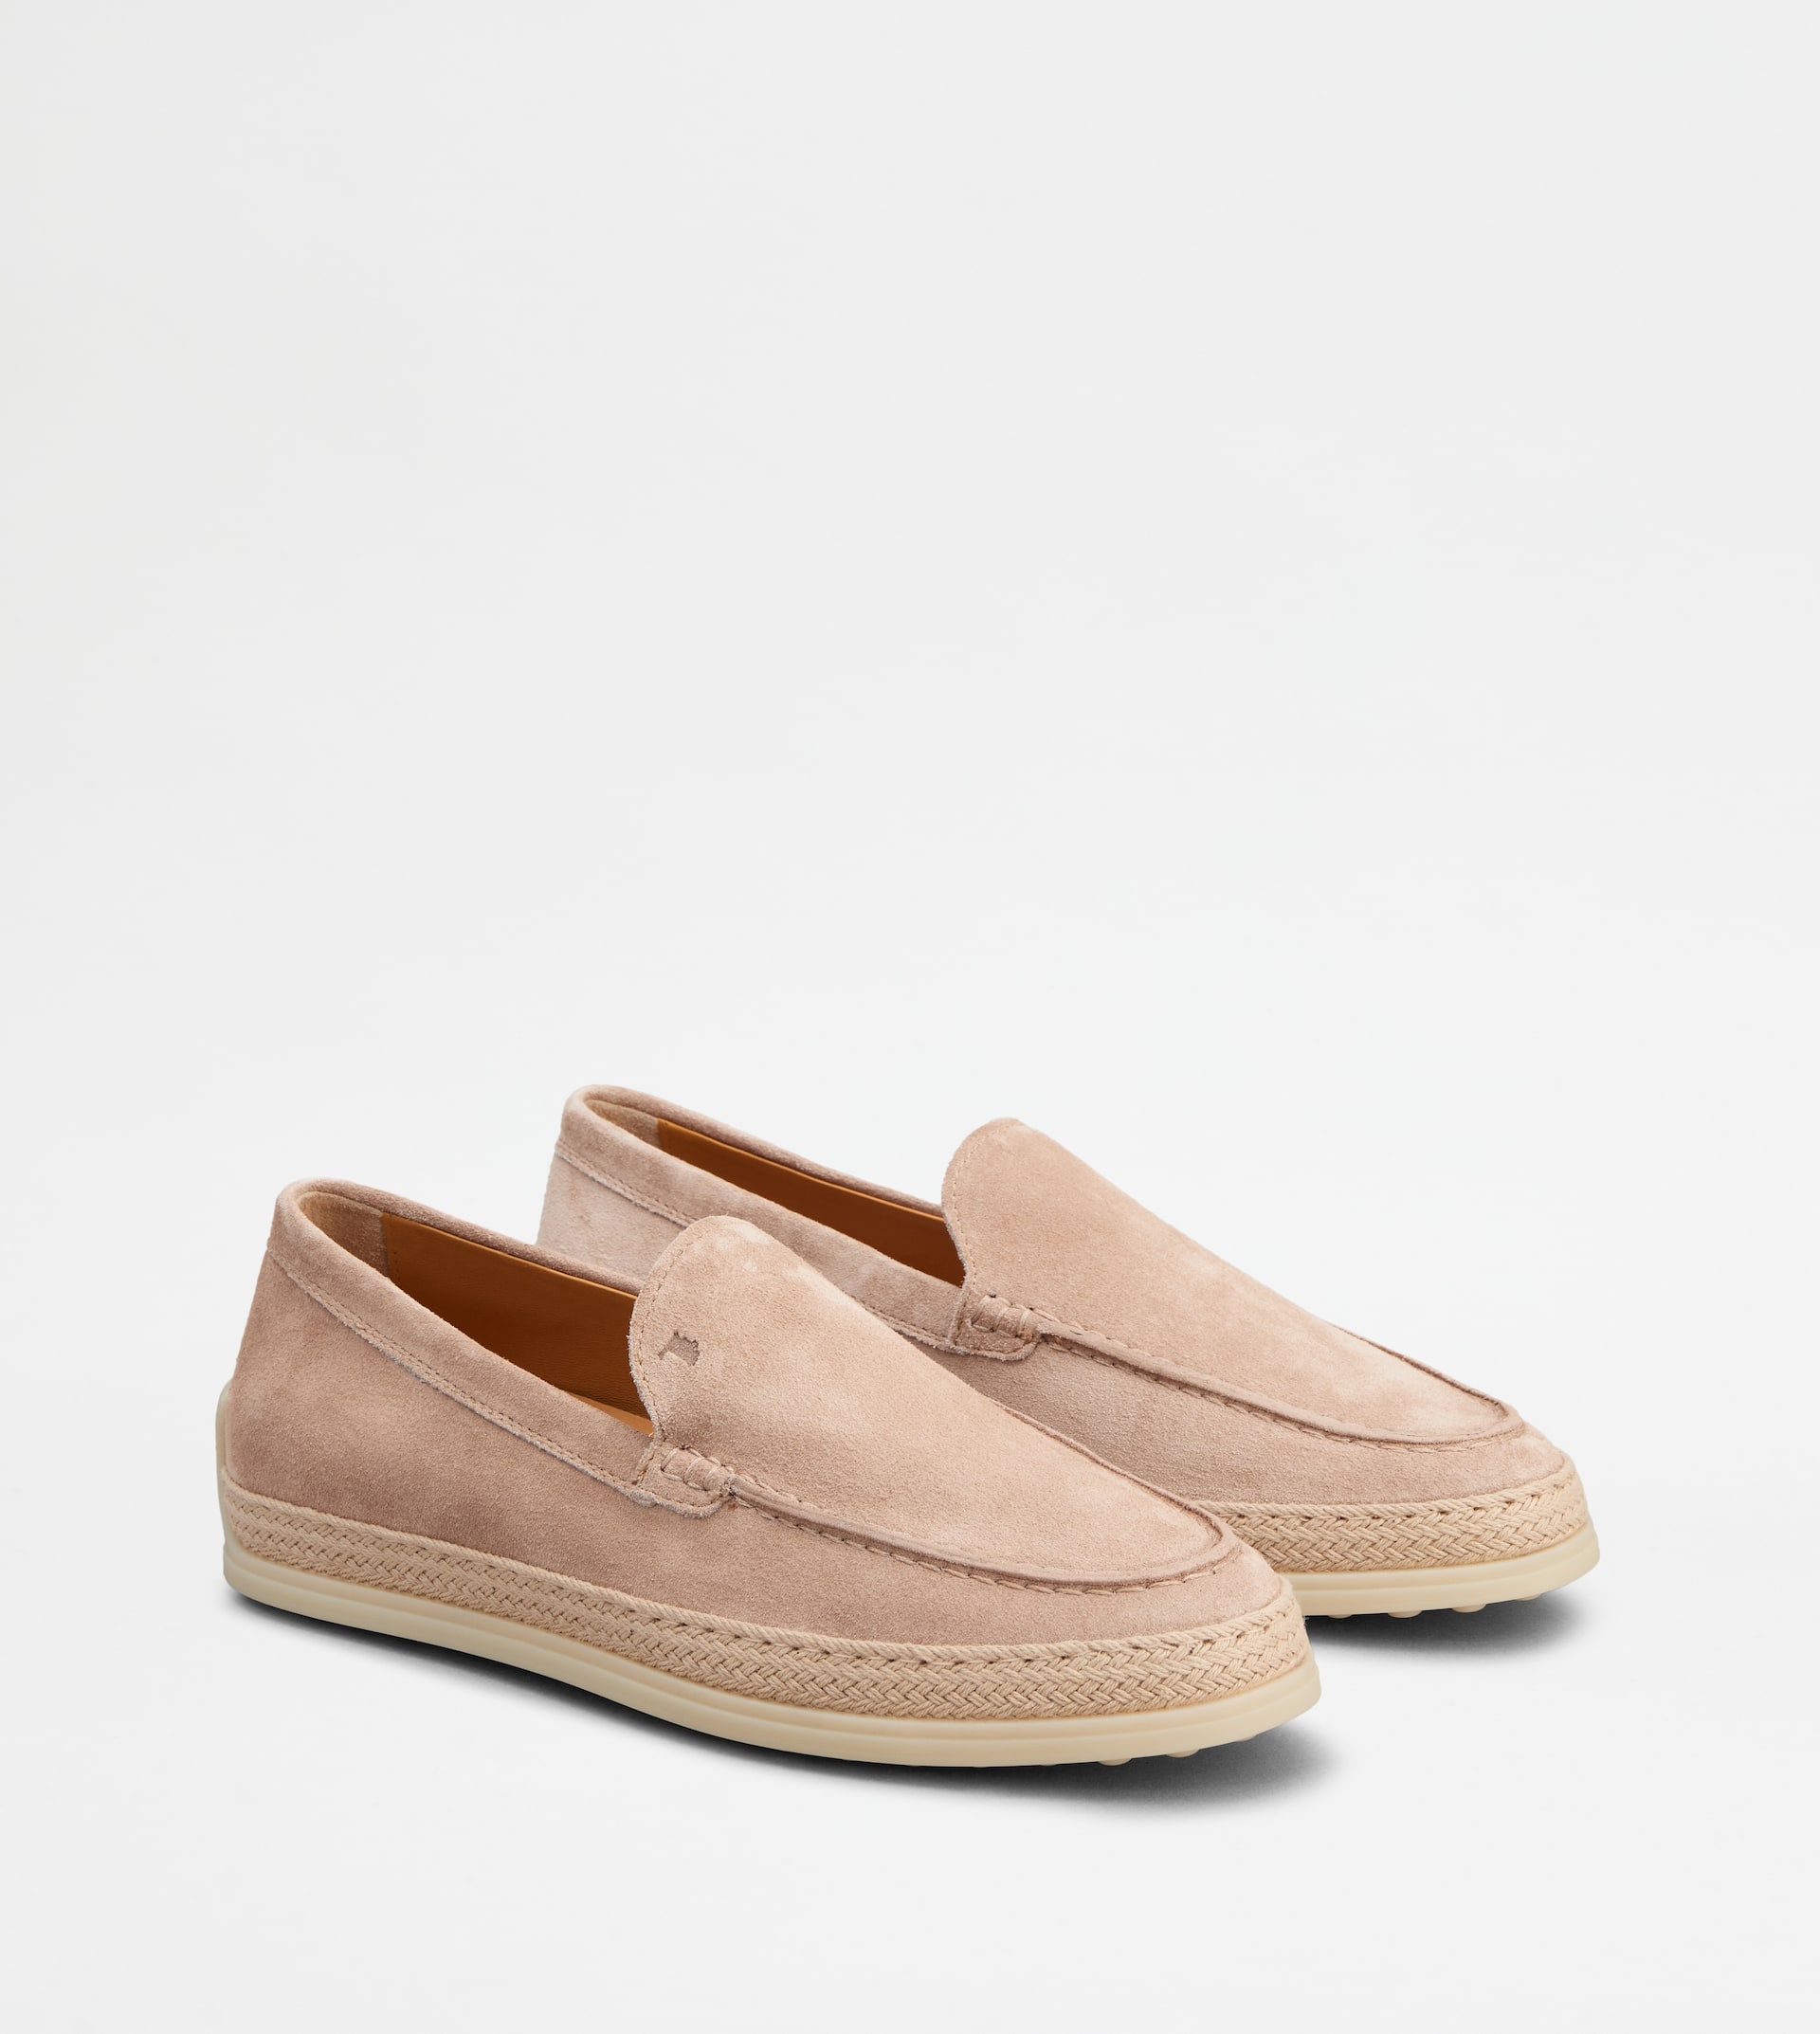 SLIPPER LOAFERS IN SUEDE - PINK - 3